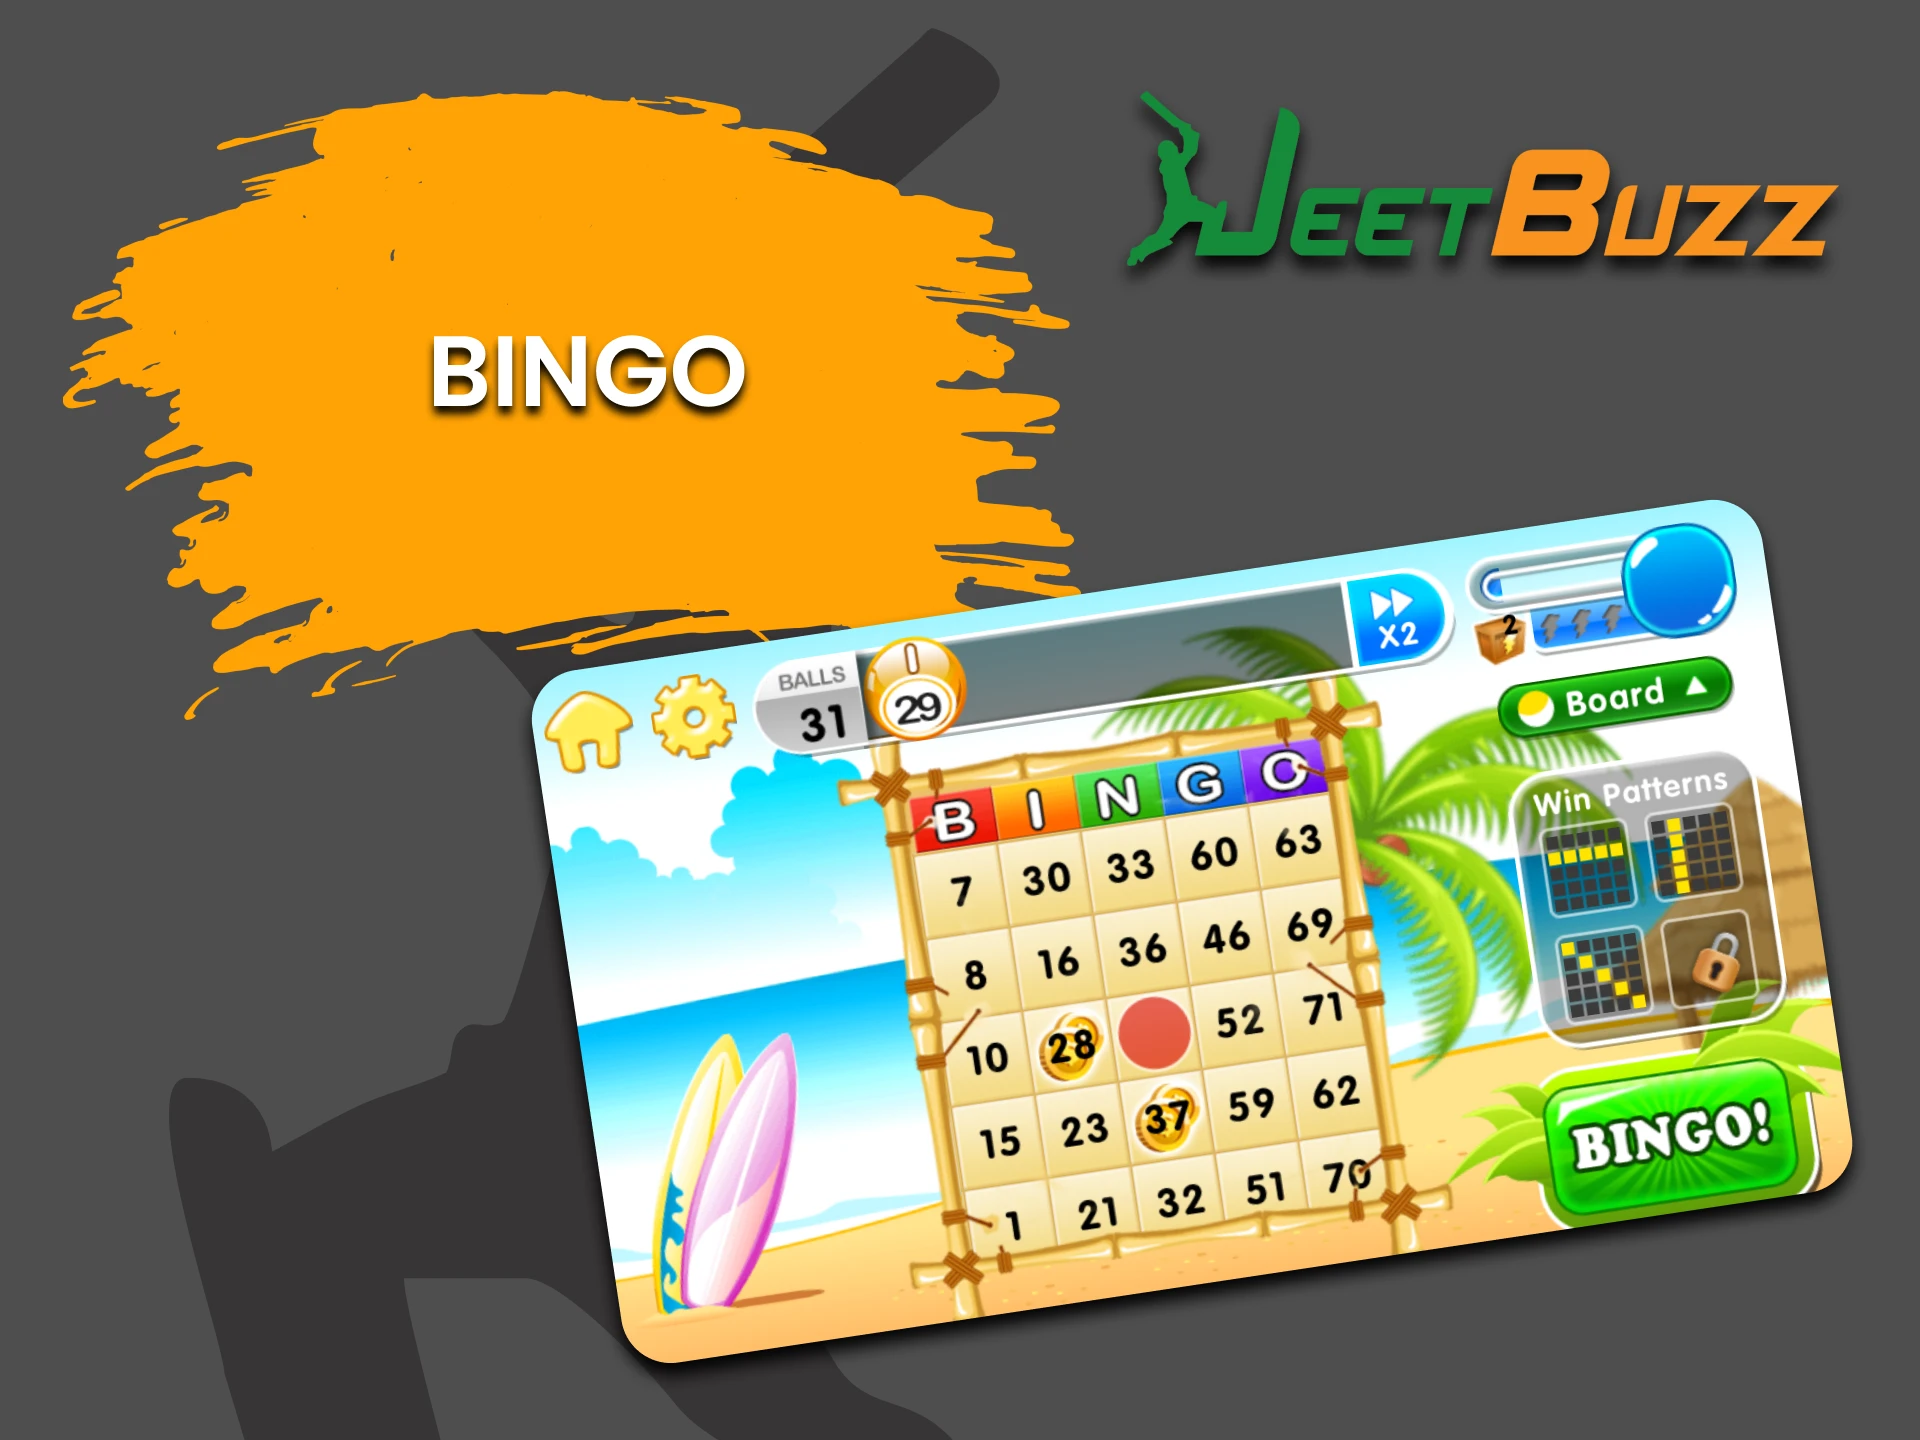 For table games from JeetBuzz, choose Bingo.